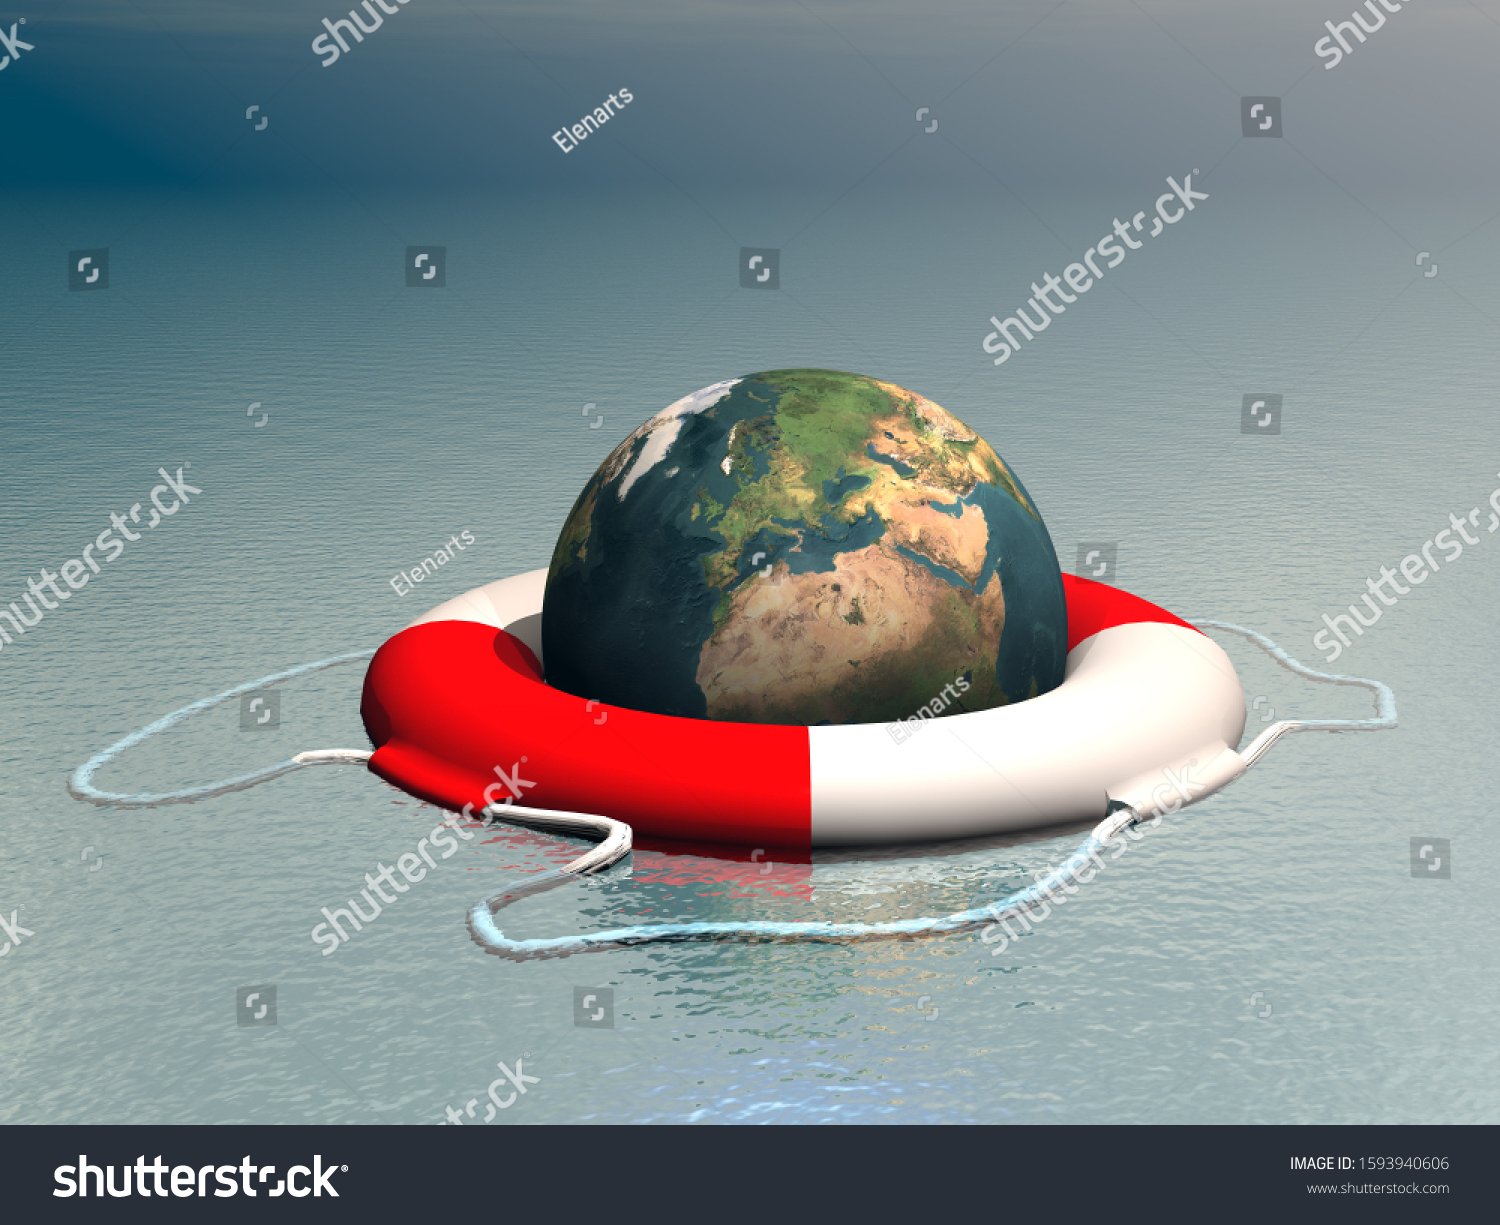 Save Planet Concept Image Earth Floating のイラスト素材